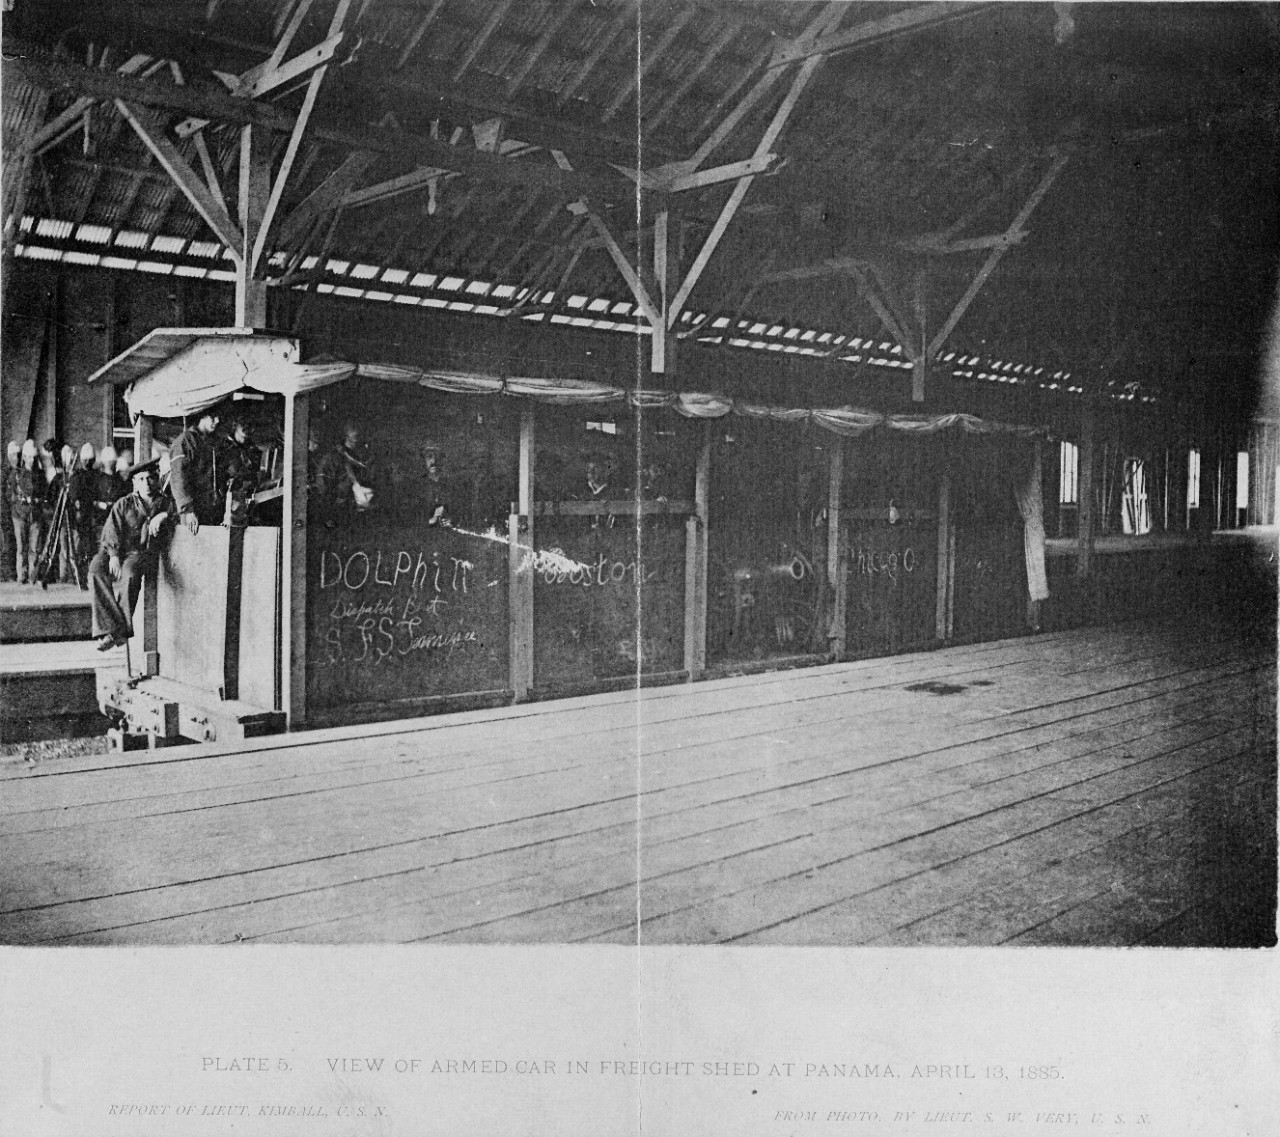 View of Armed Car in Freight Shed at Panama, April 13, 1885. 